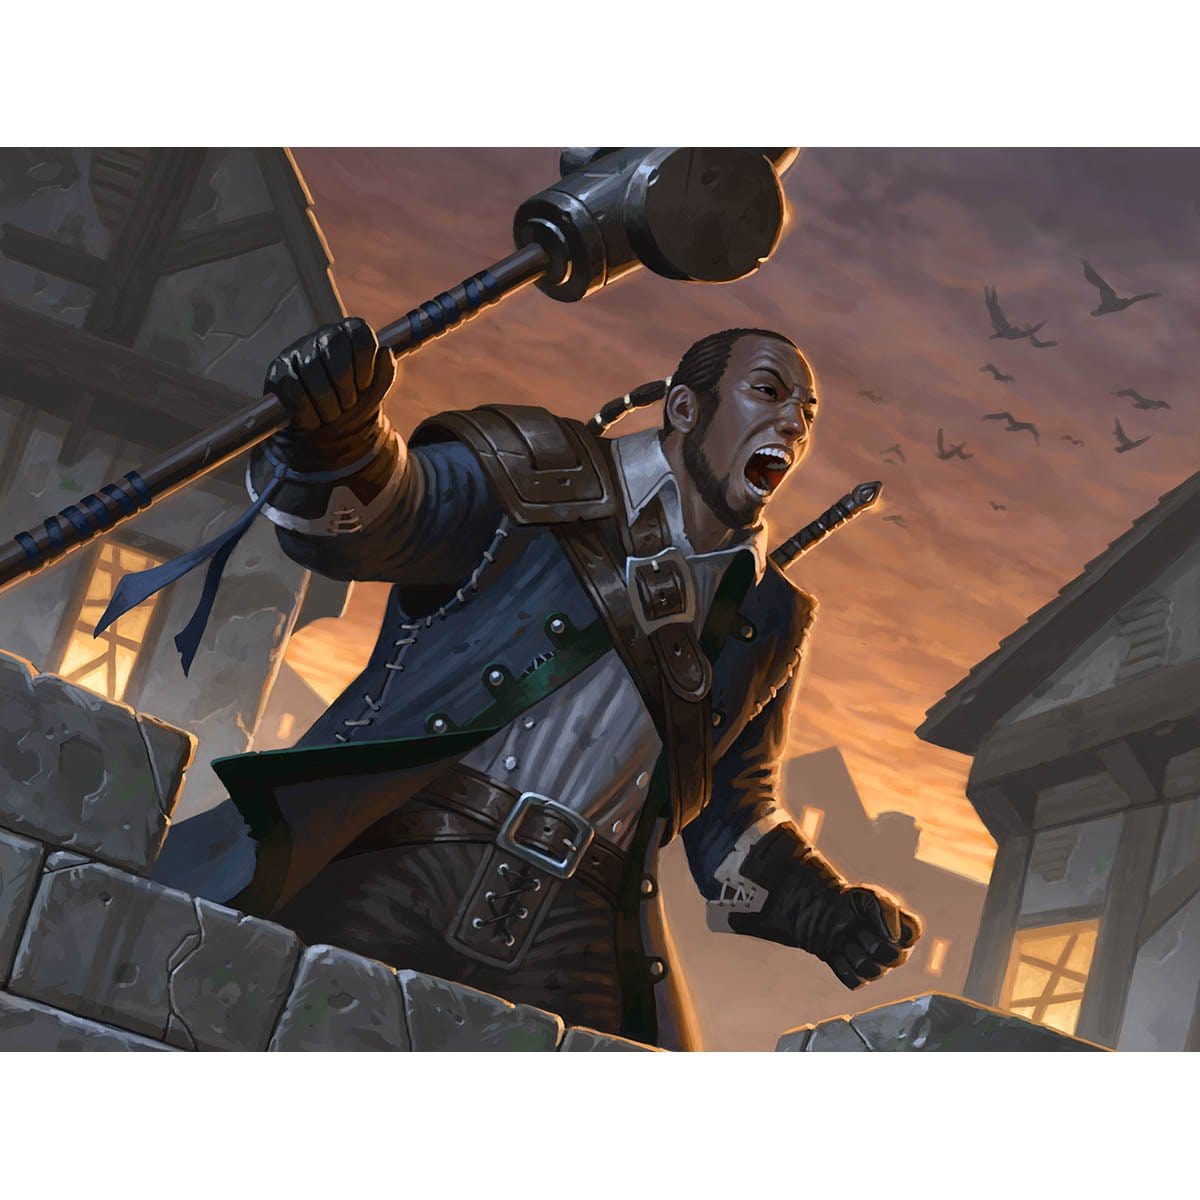 Duskwatch Recruiter Print - Print - Original Magic Art - Accessories for Magic the Gathering and other card games